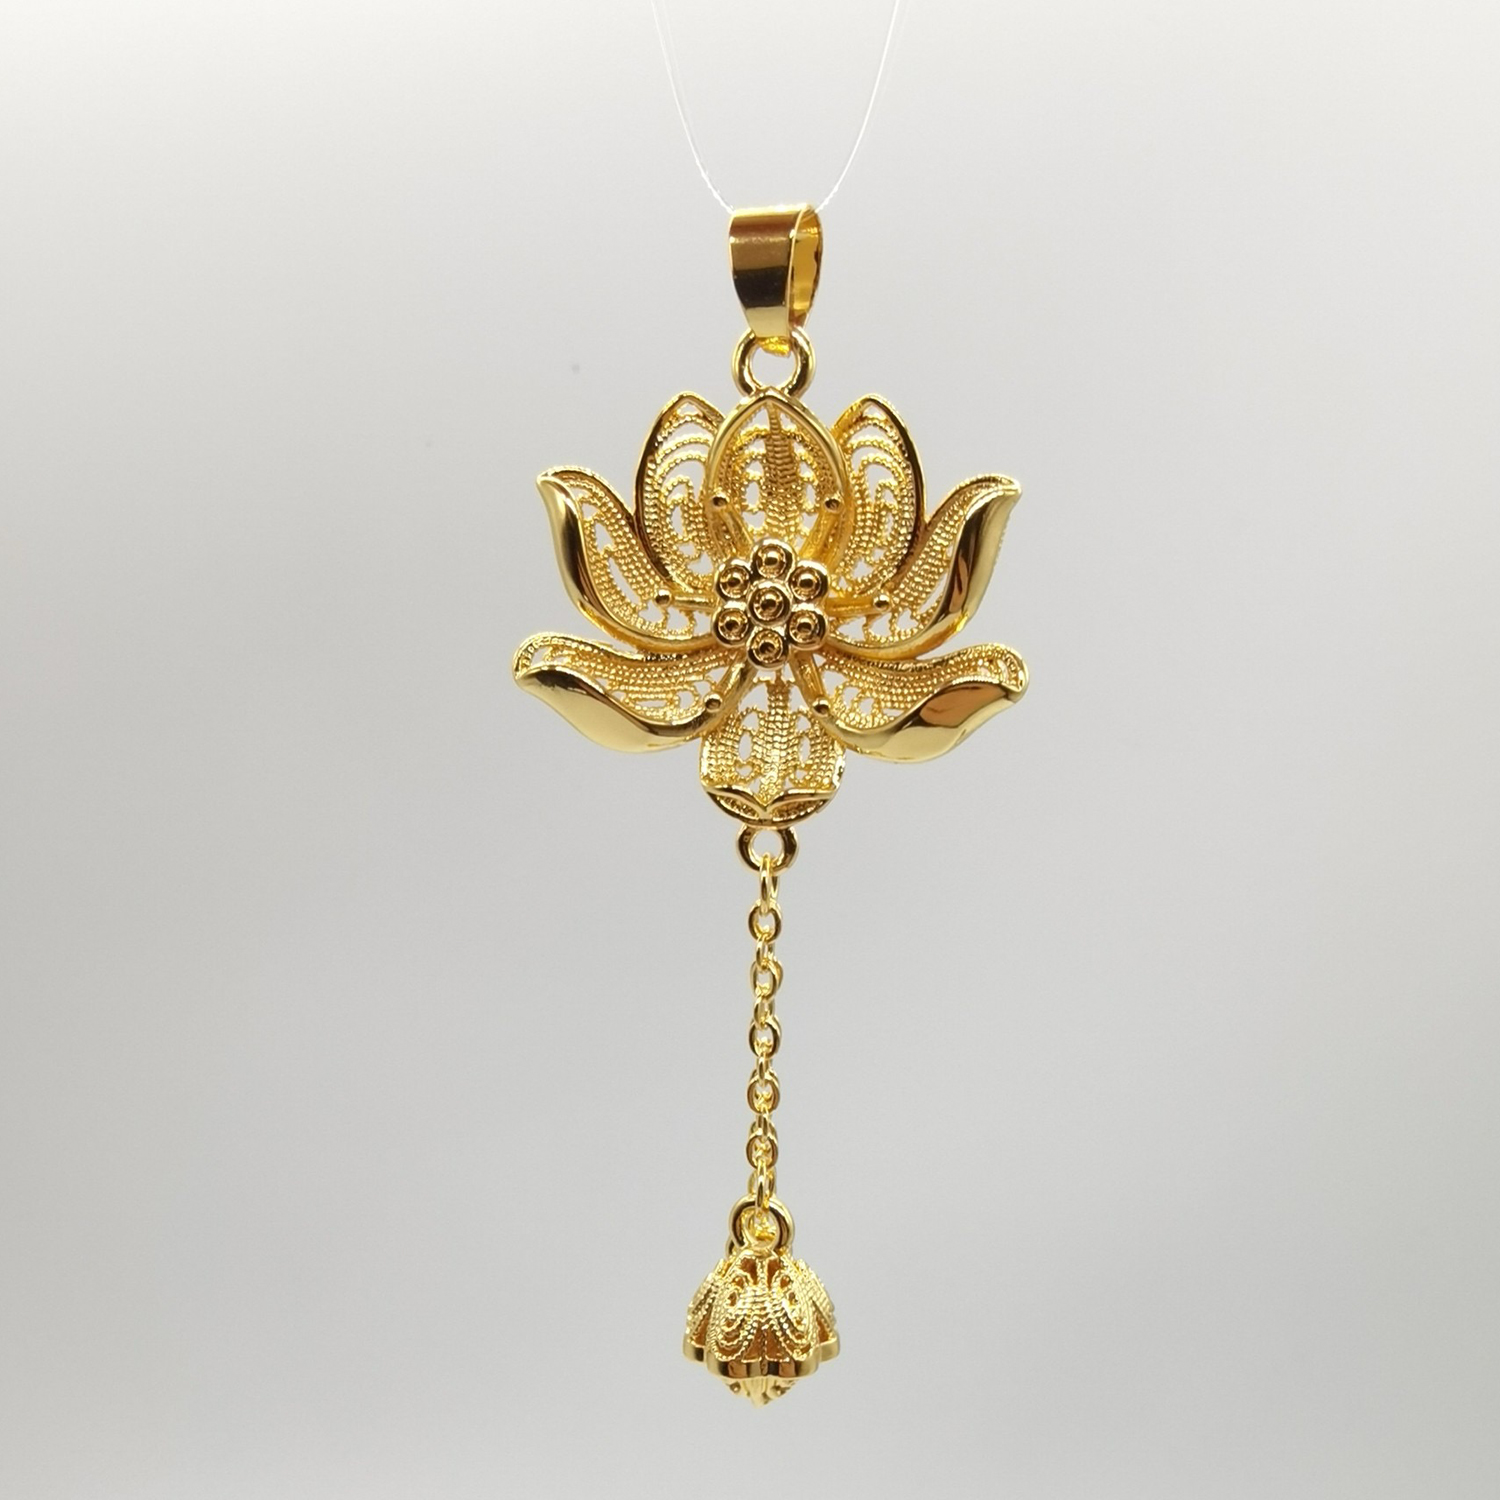 Alluvial gold ancient method vacuum electroplating 24K gold lotus pendant for joy of two generations